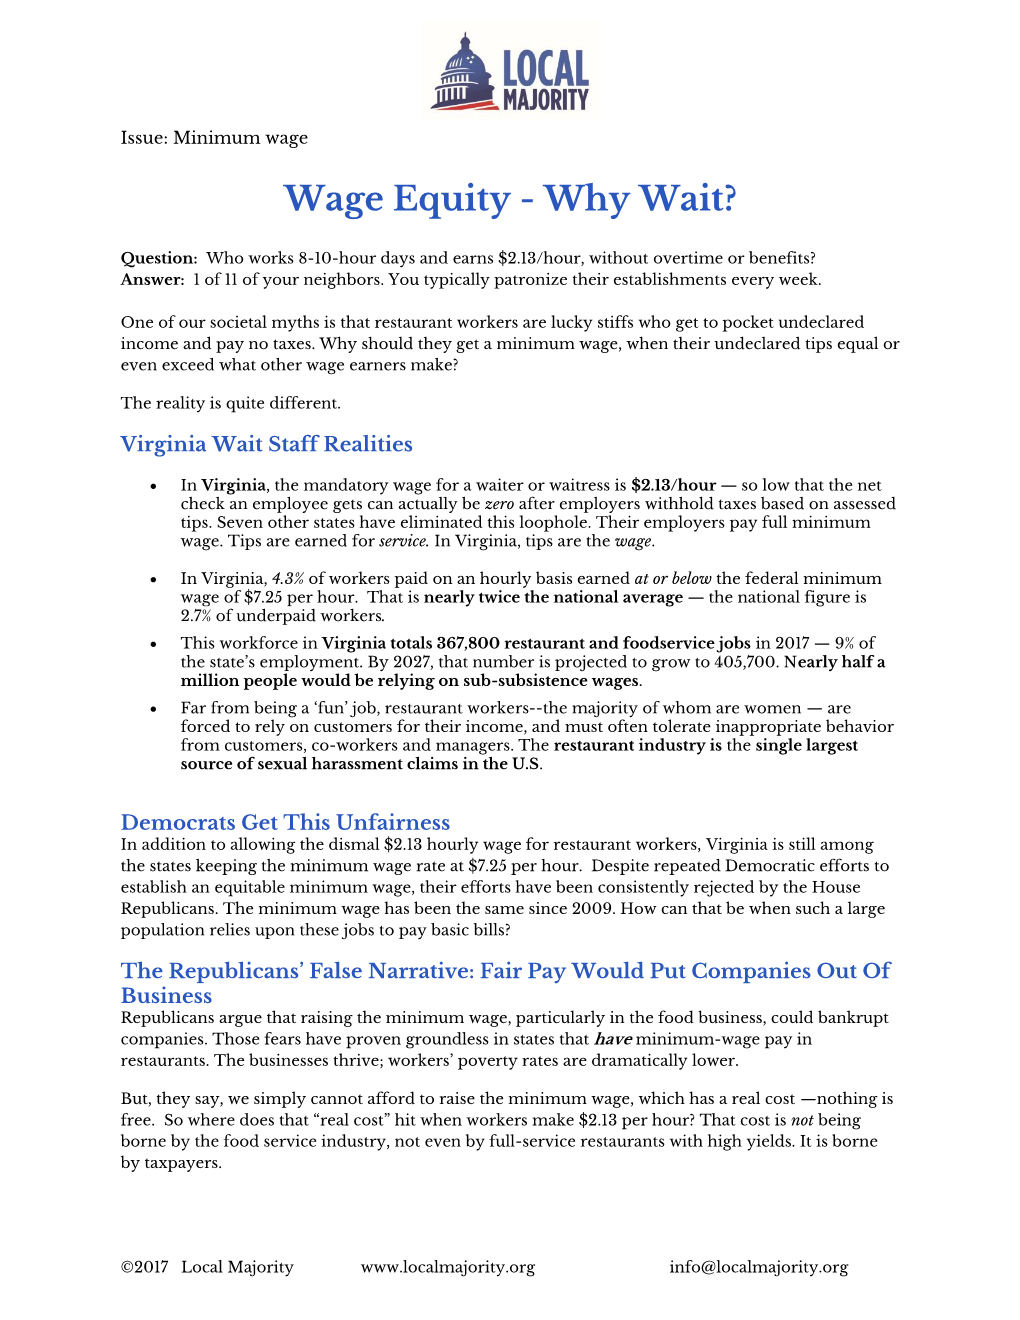 Wage Equity - Why Wait?